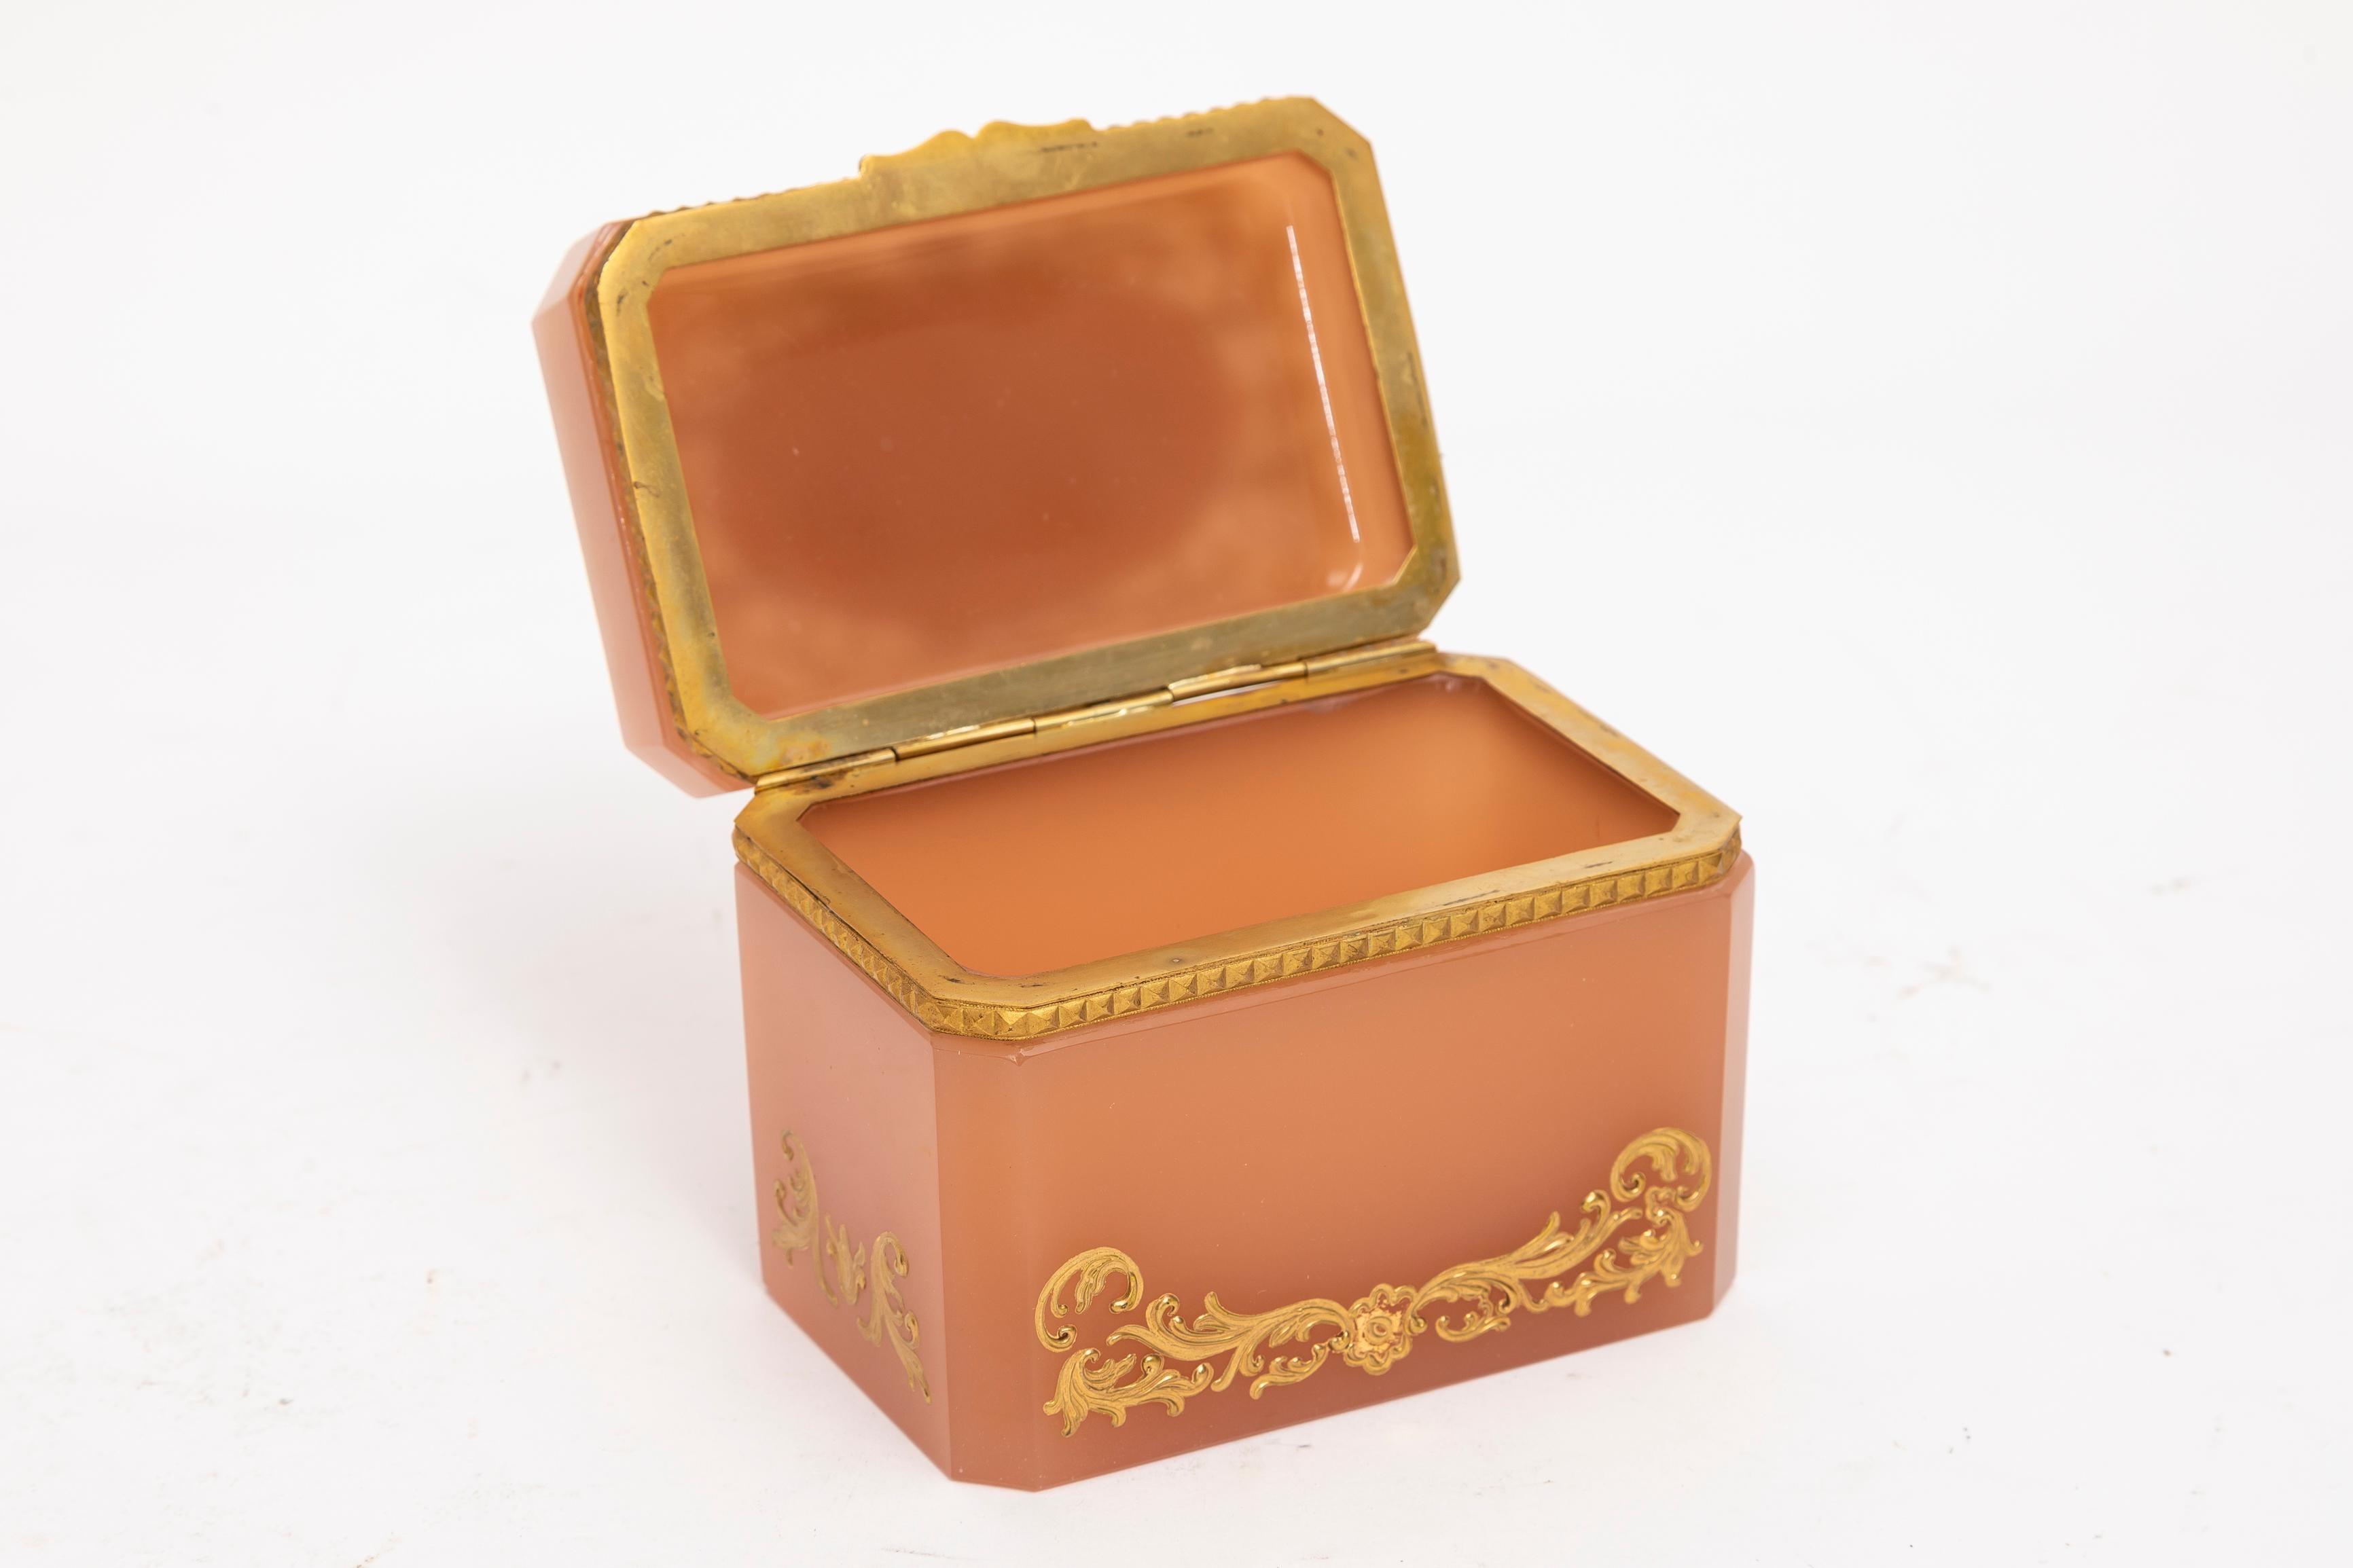 An Unusual Peach Opaline Dore Bronze Mounted Hinged Box by Moser with Raised Gold Decoration and Floral Enamel Decoration. Opaline of this quality and color is truly difficult to find. Each section of this crystal box has been carefully hand-diamond